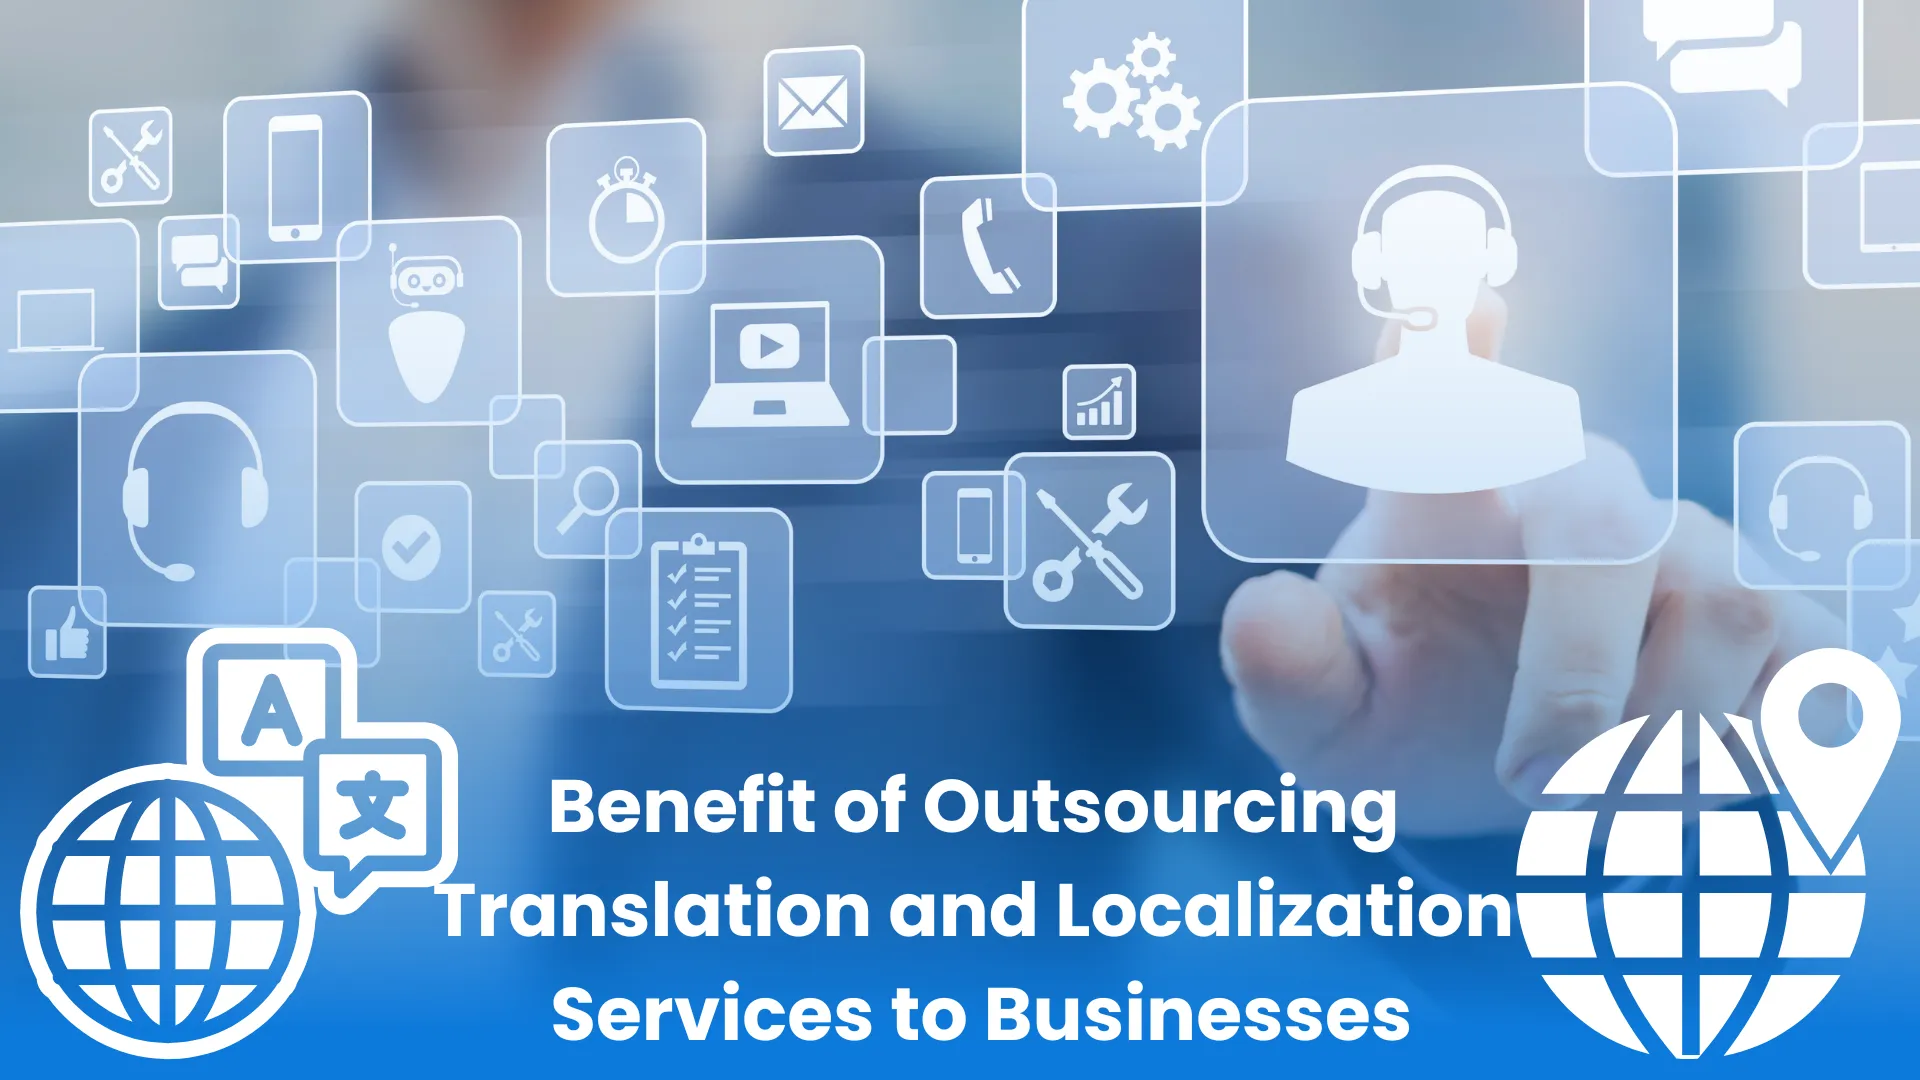 Businesses can reap the benefits of outsourcing translation and localization services. This strategic decision allows companies to leverage virtual translation services and improve their localization strategy.